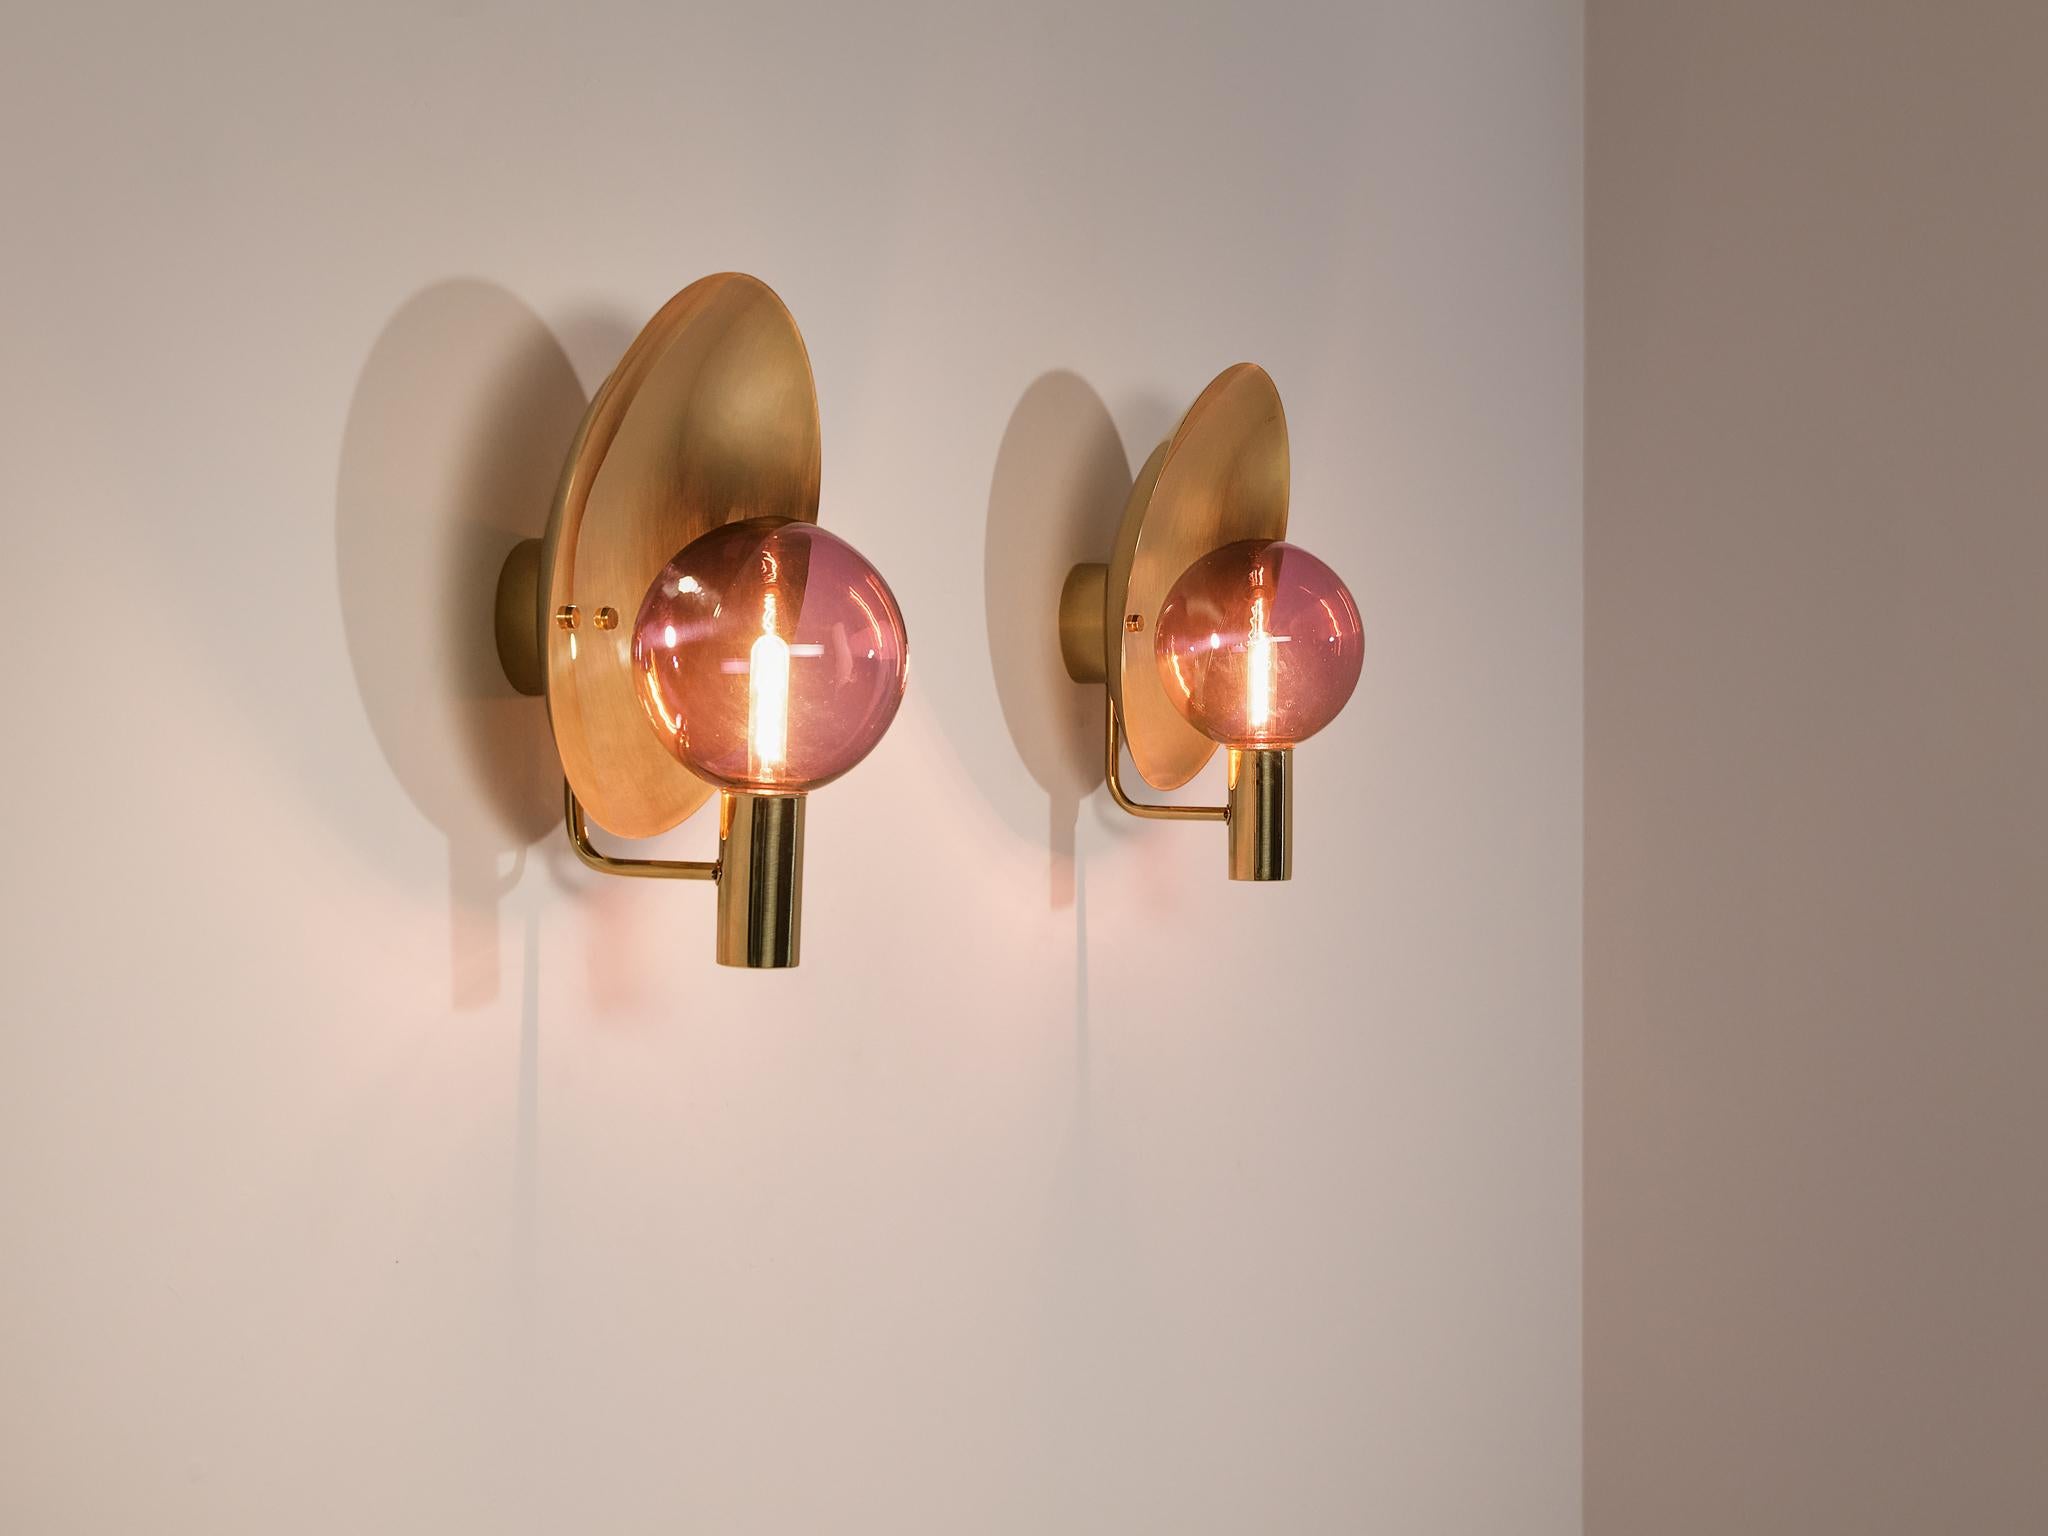 Hans-Agne Jakobsson for Hans-Agne Jakobsson AB in Markaryd, pair of wall lights model V-180, brass, colored glass, Sweden, 1960s

These well-executed wall lights model 'V-180' are designed by Hans-Agne Jakobsson. This design is produced by his own